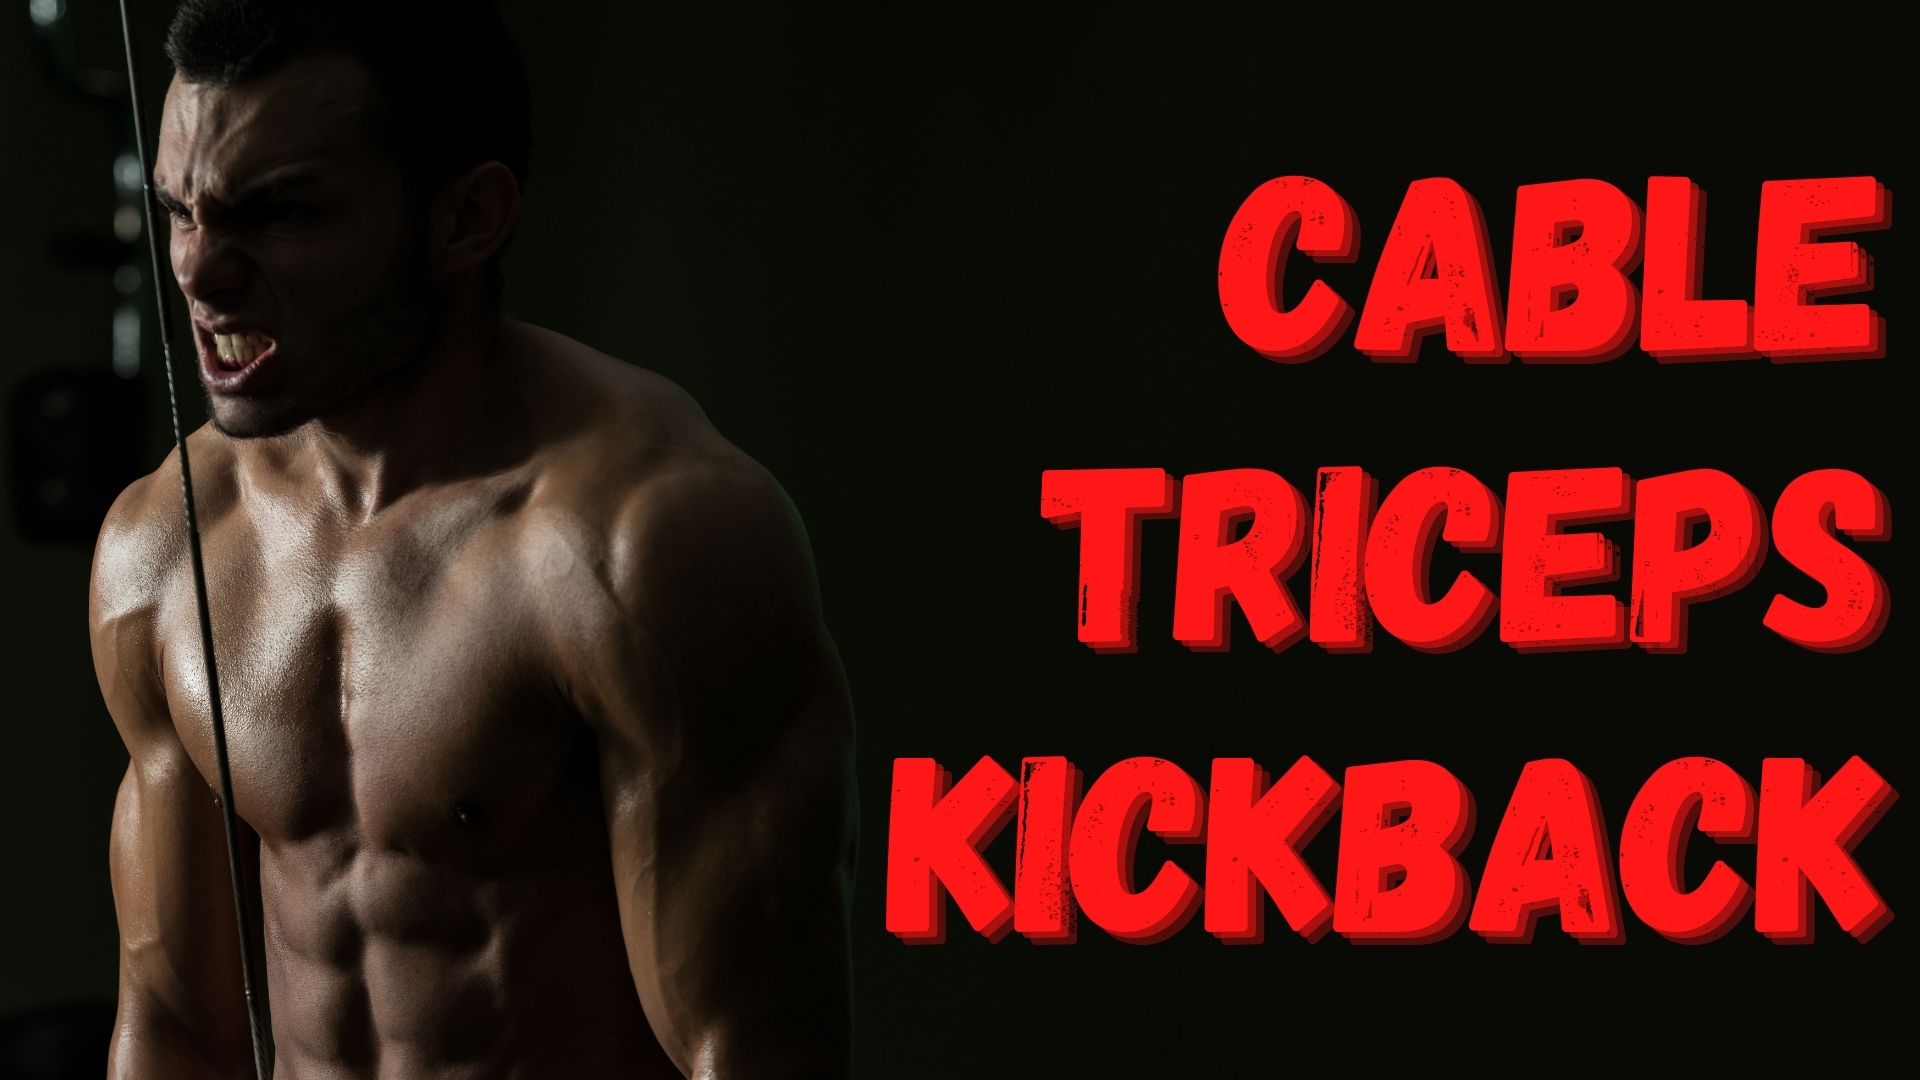 Cable Triceps Kickback